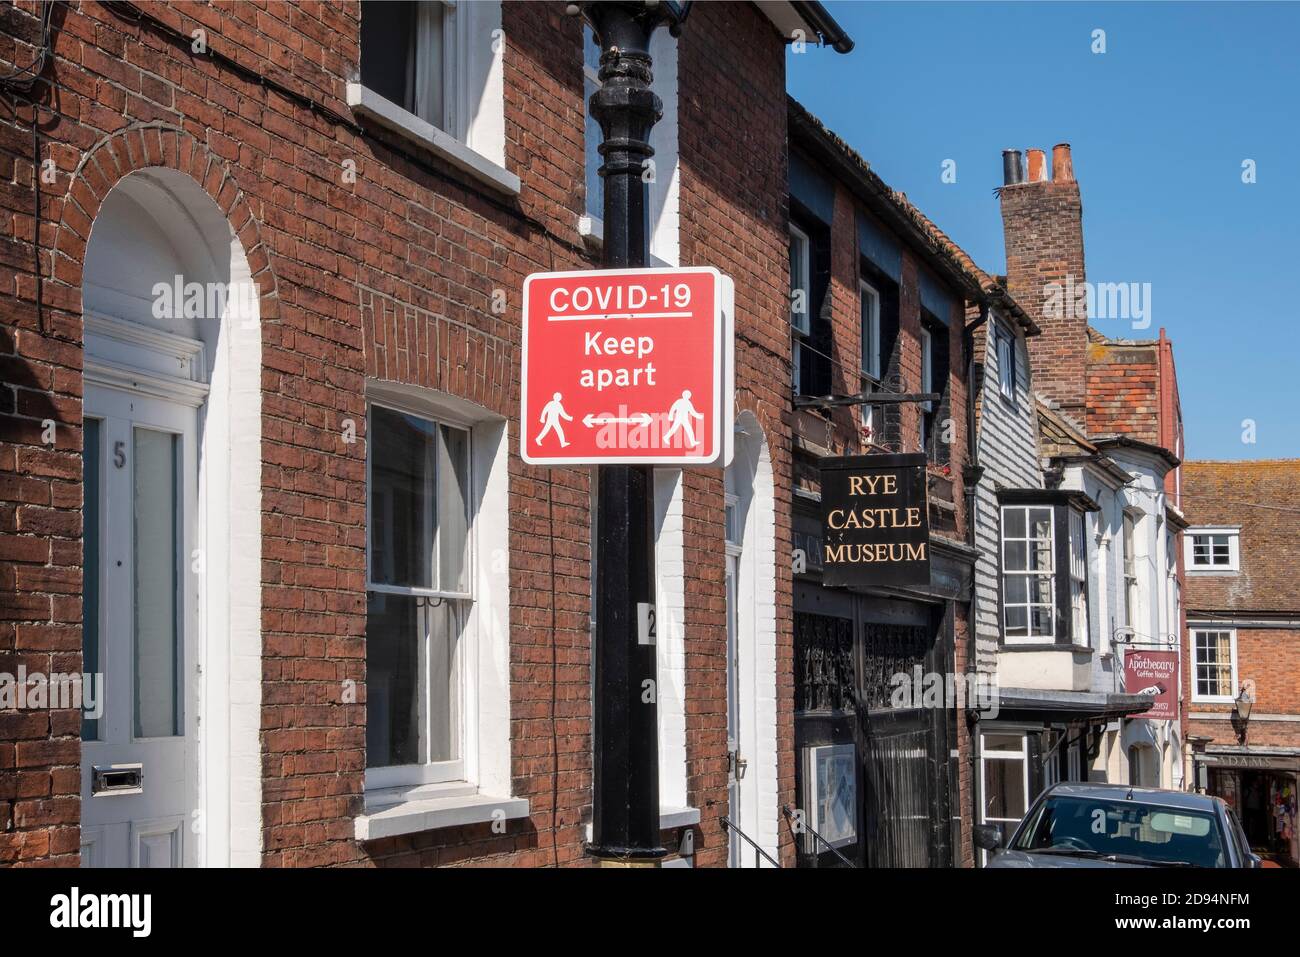 Covid 19, Social Distancing sign in Rye, East Sussex, UK Stockfoto